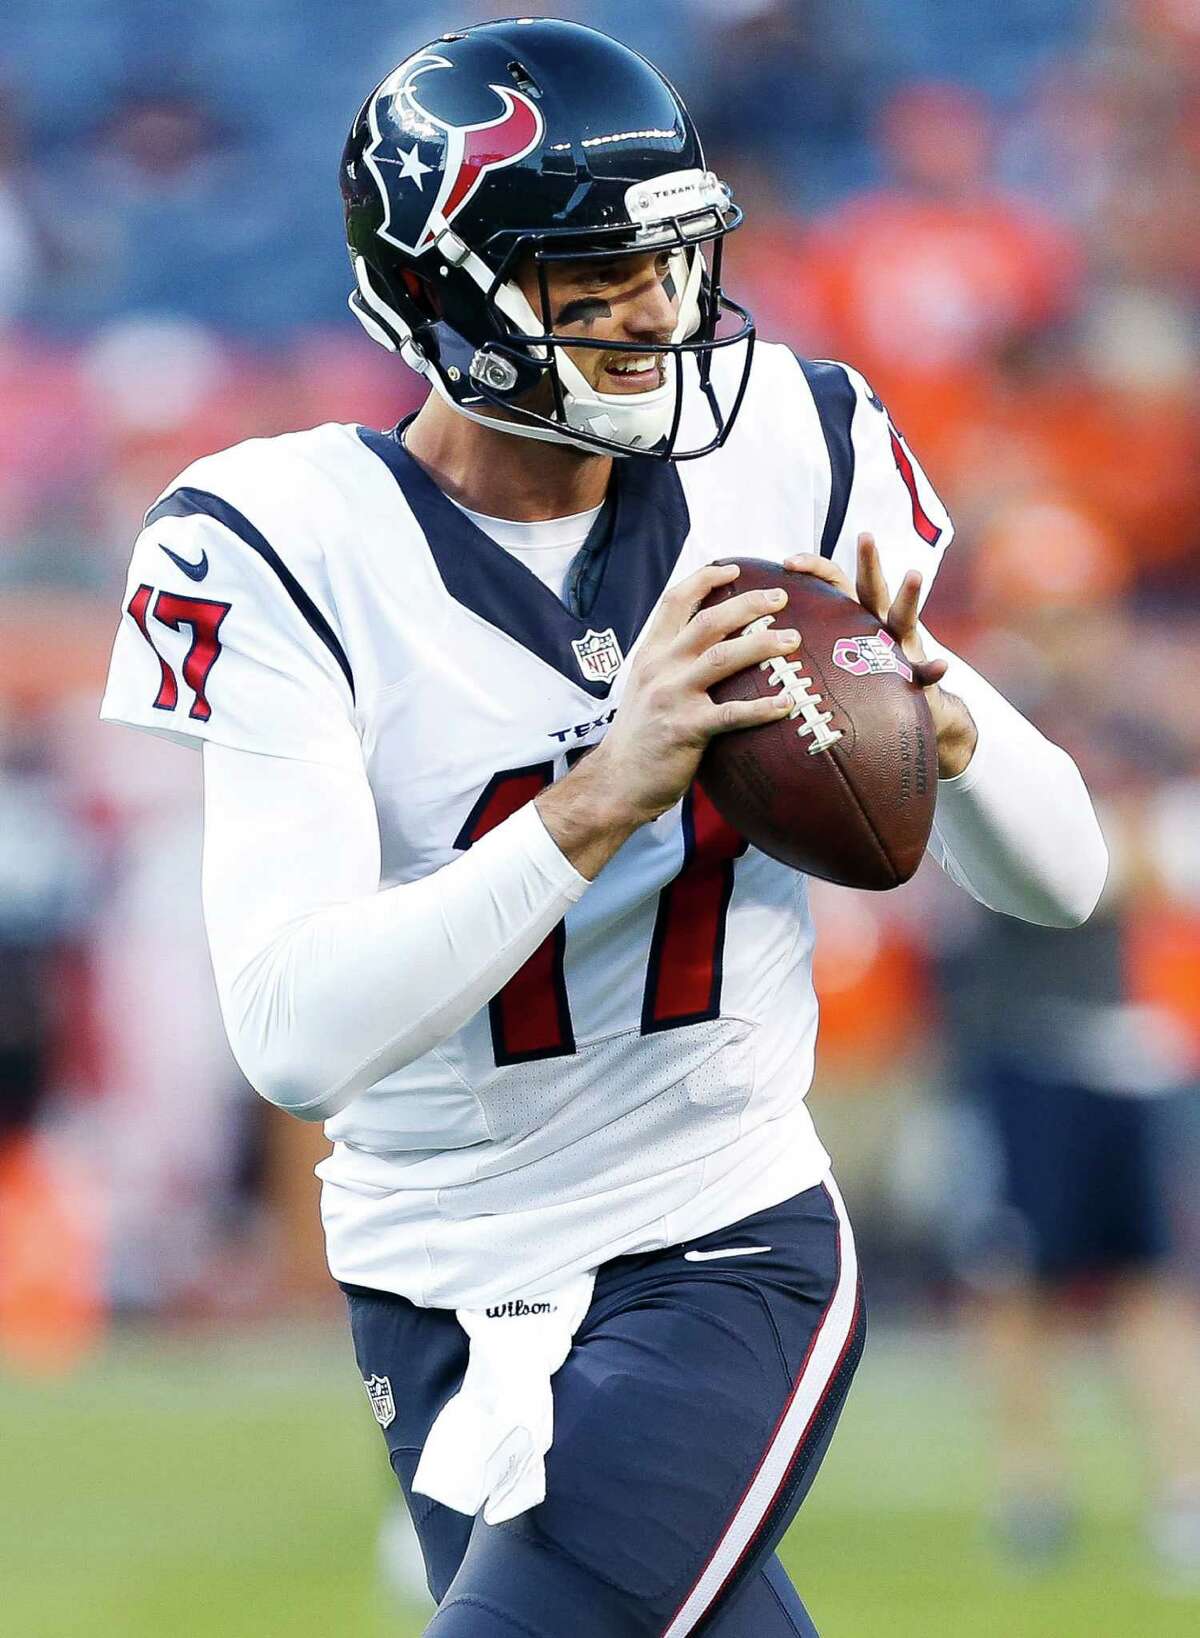 Houston Texans quarterback Brock Osweiler (17) makes a pass before an NFL football game at Sports Authority Field at Mile High on Monday, Oct. 24, 2016, in Denver.